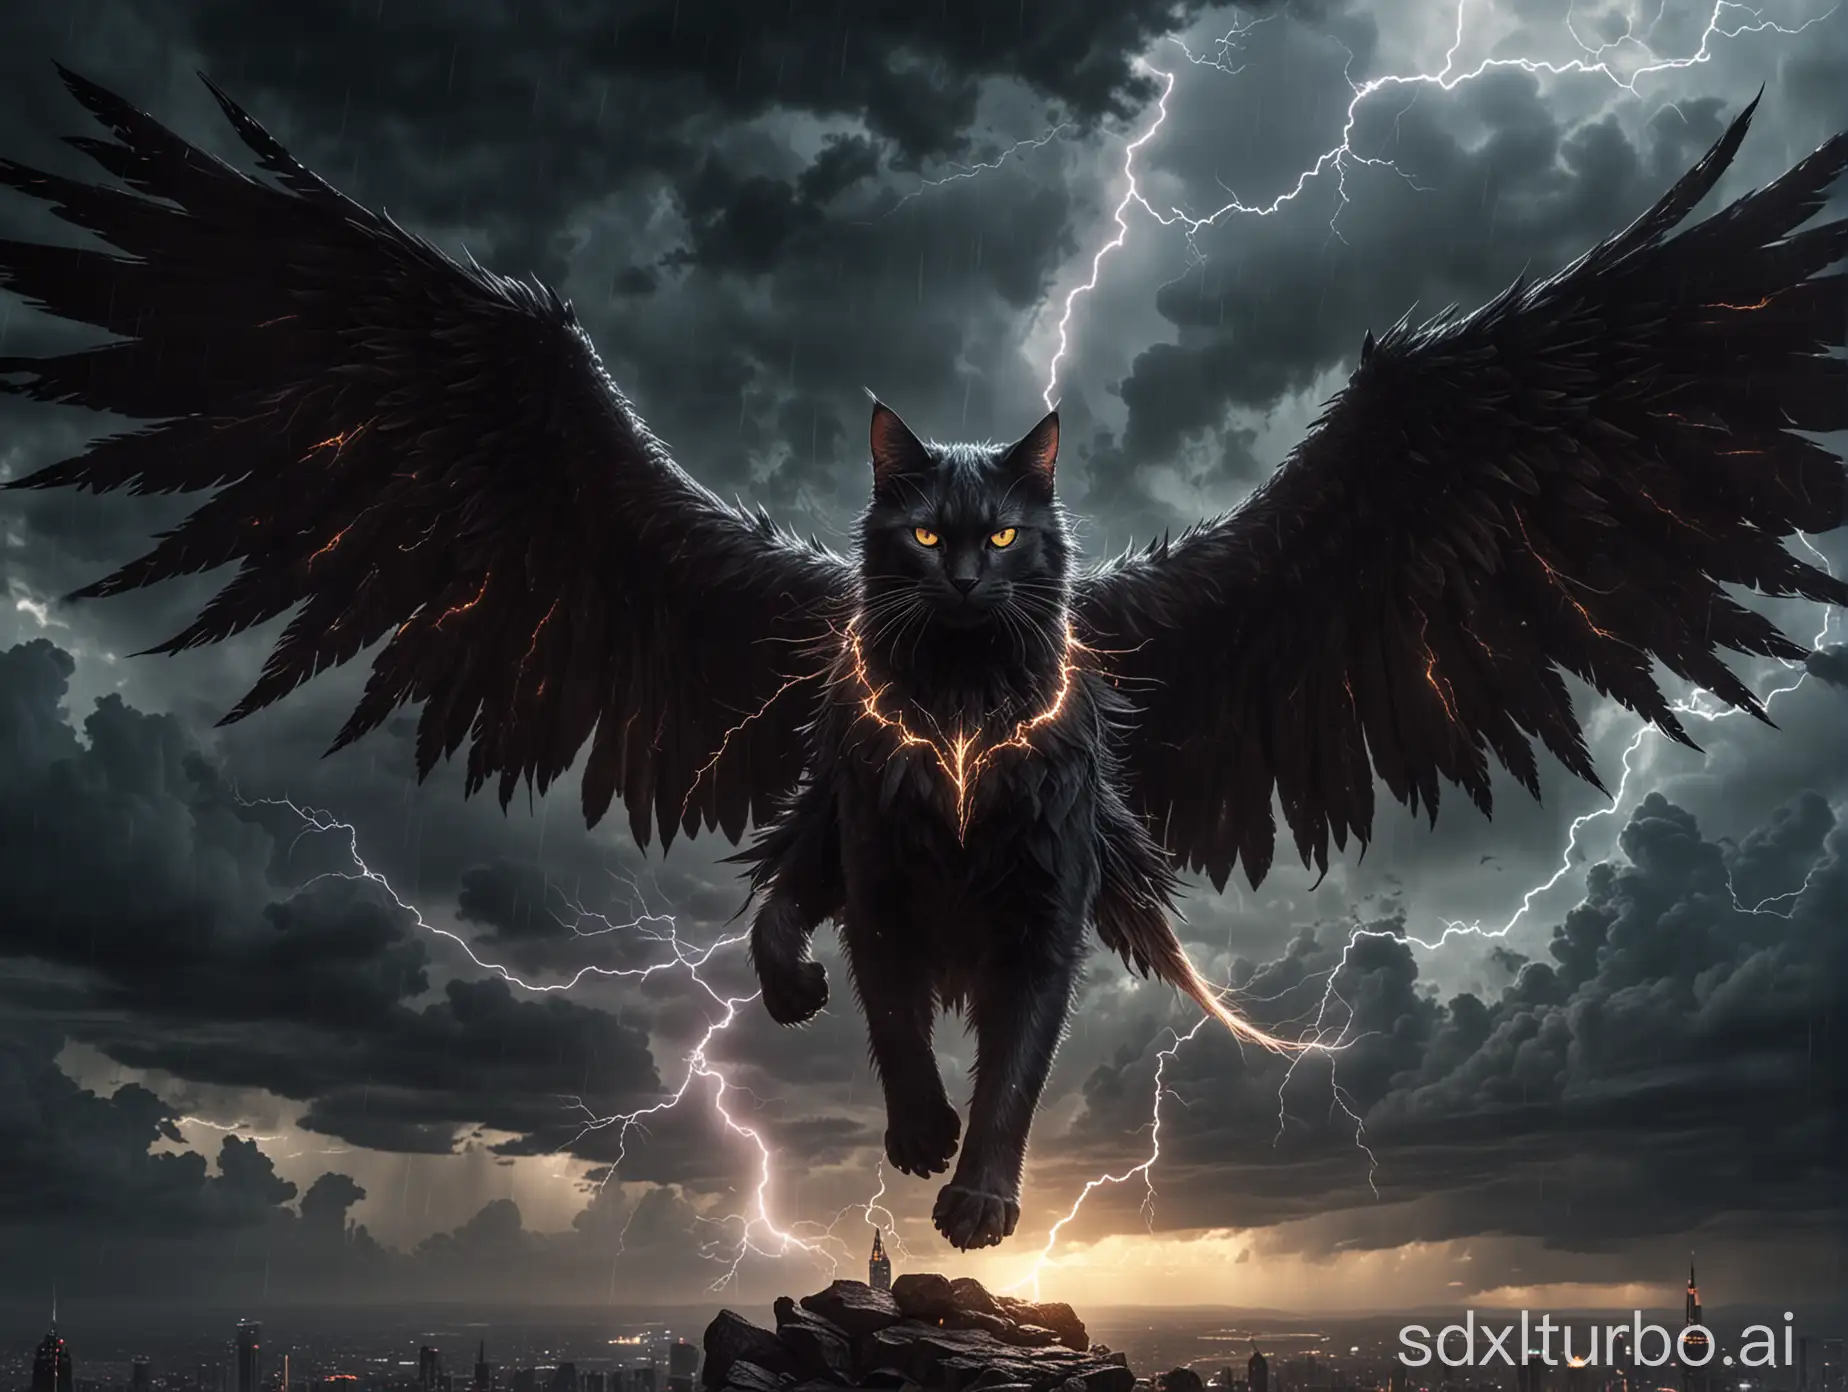 Majestic-Cat-King-with-Demonic-Wings-Amidst-Dark-Clouds-and-Lightning